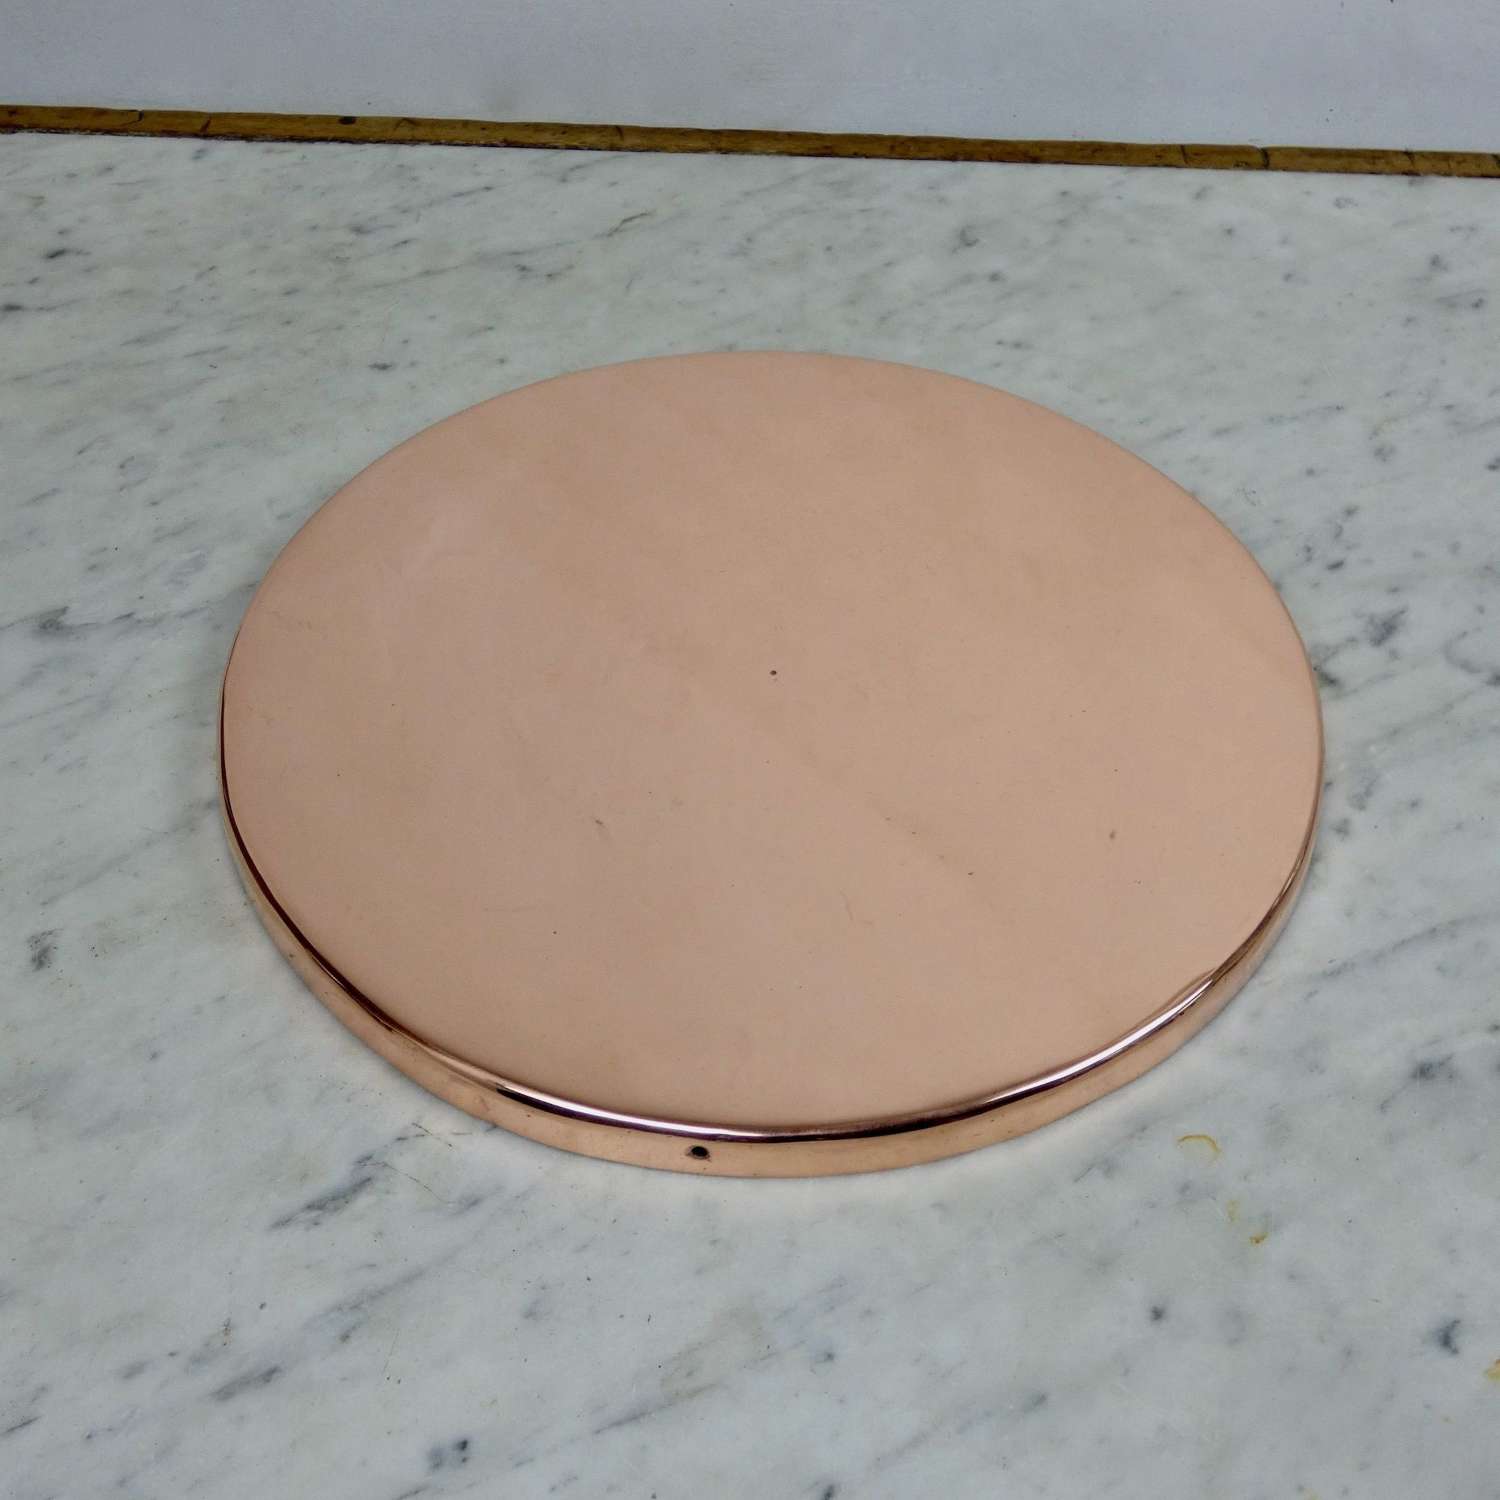 Copper baking sheet or tray